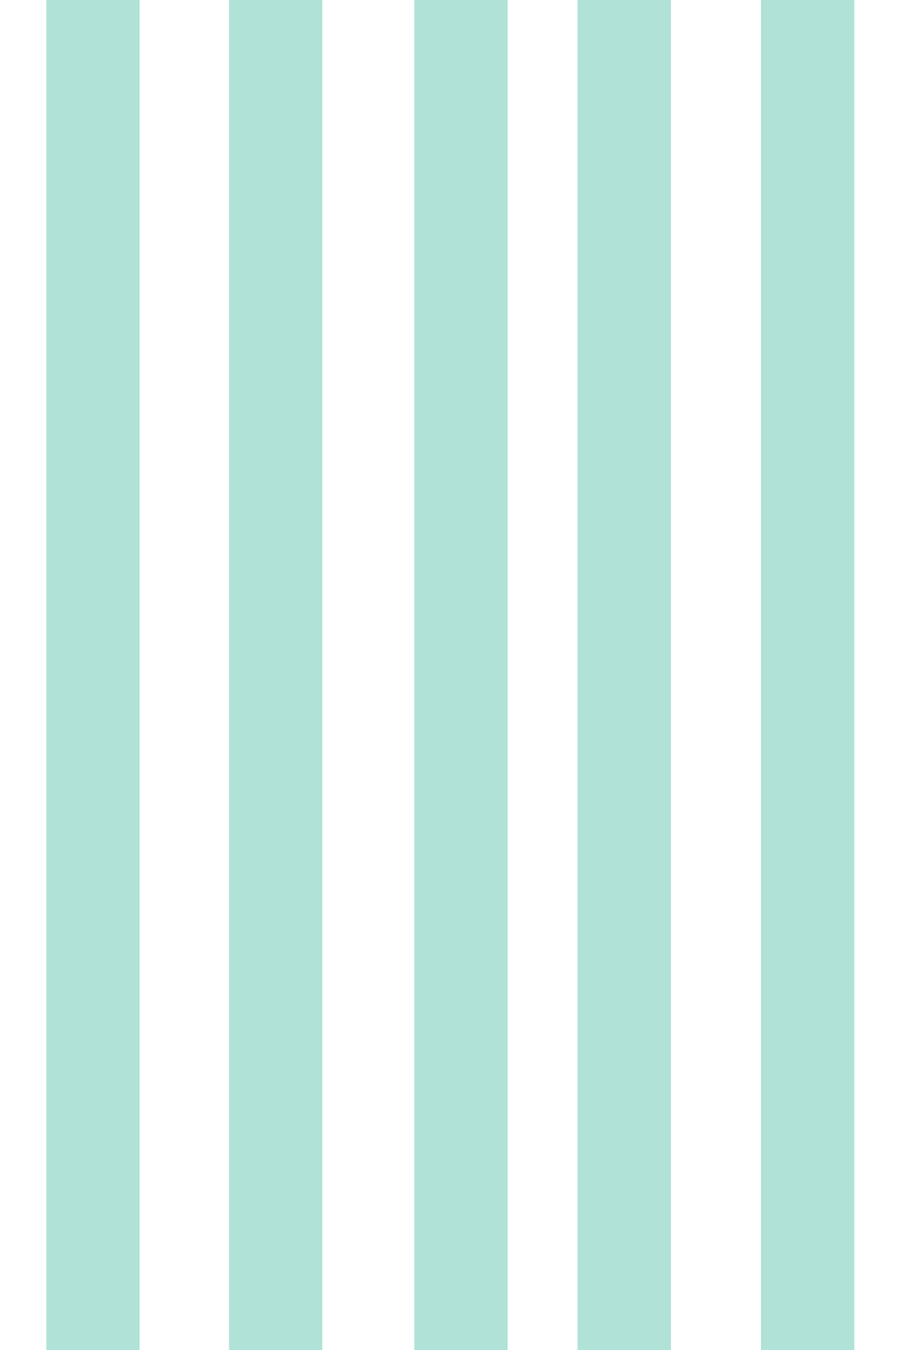 Woolf With Me Fitted Crib Sheet Stripes color_mint